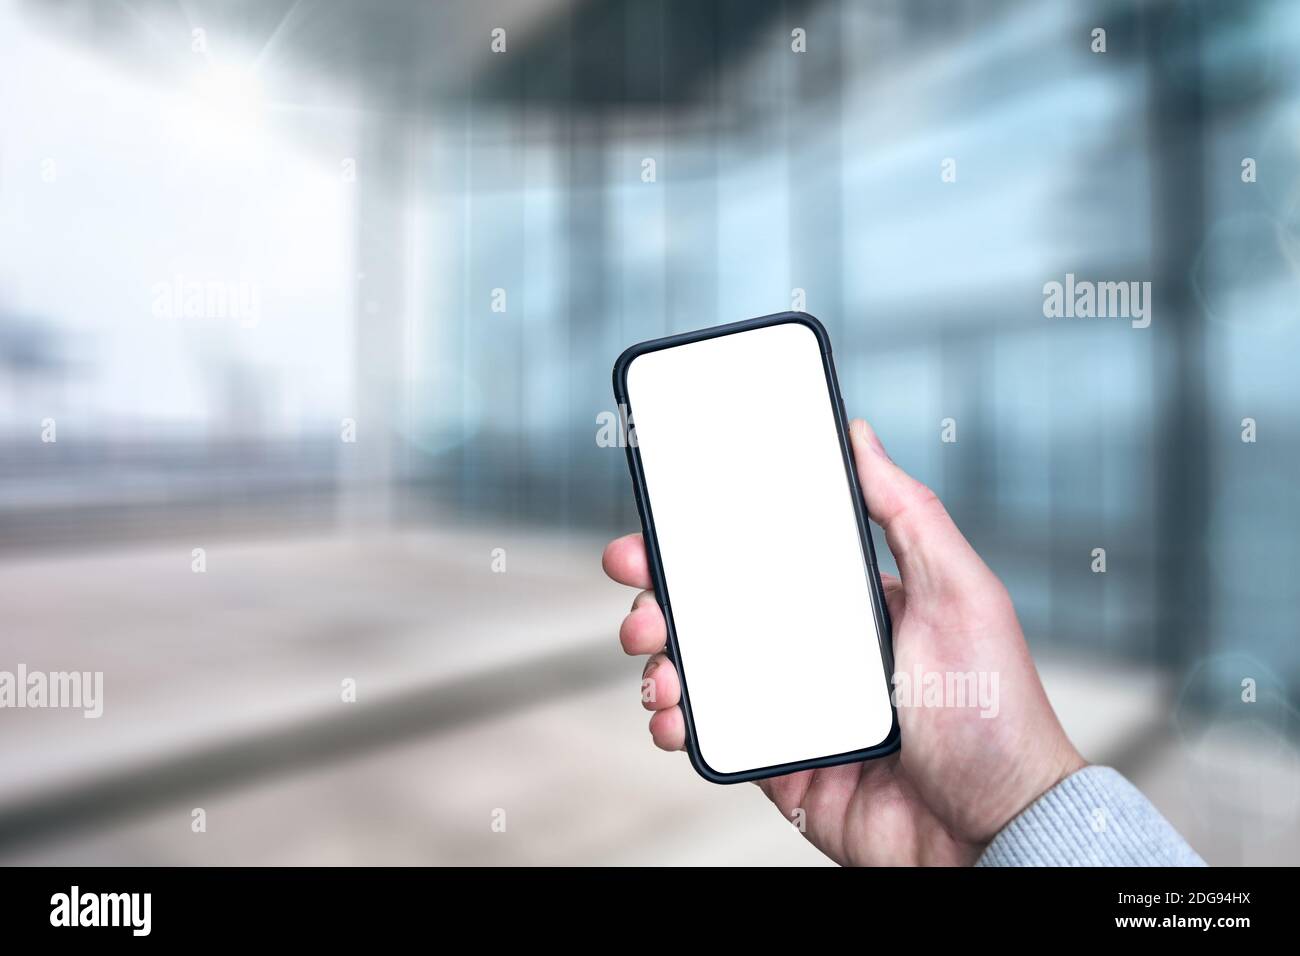 Hand holding modern smartphone with white screen Stock Photo